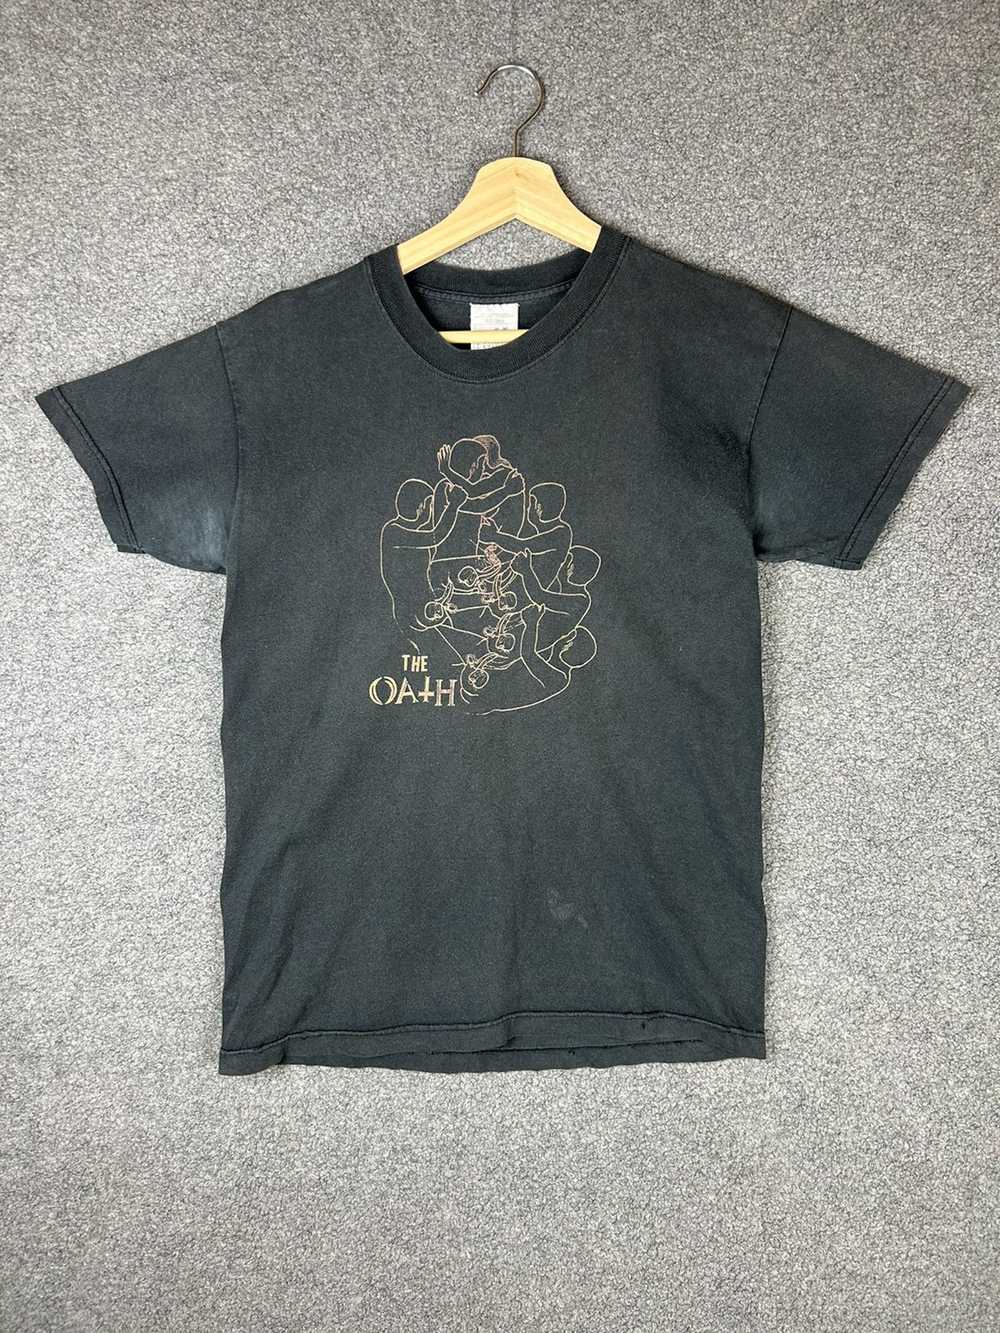 Band Tees × Vintage Vintage 90s The OATH T-Shirt … - image 1